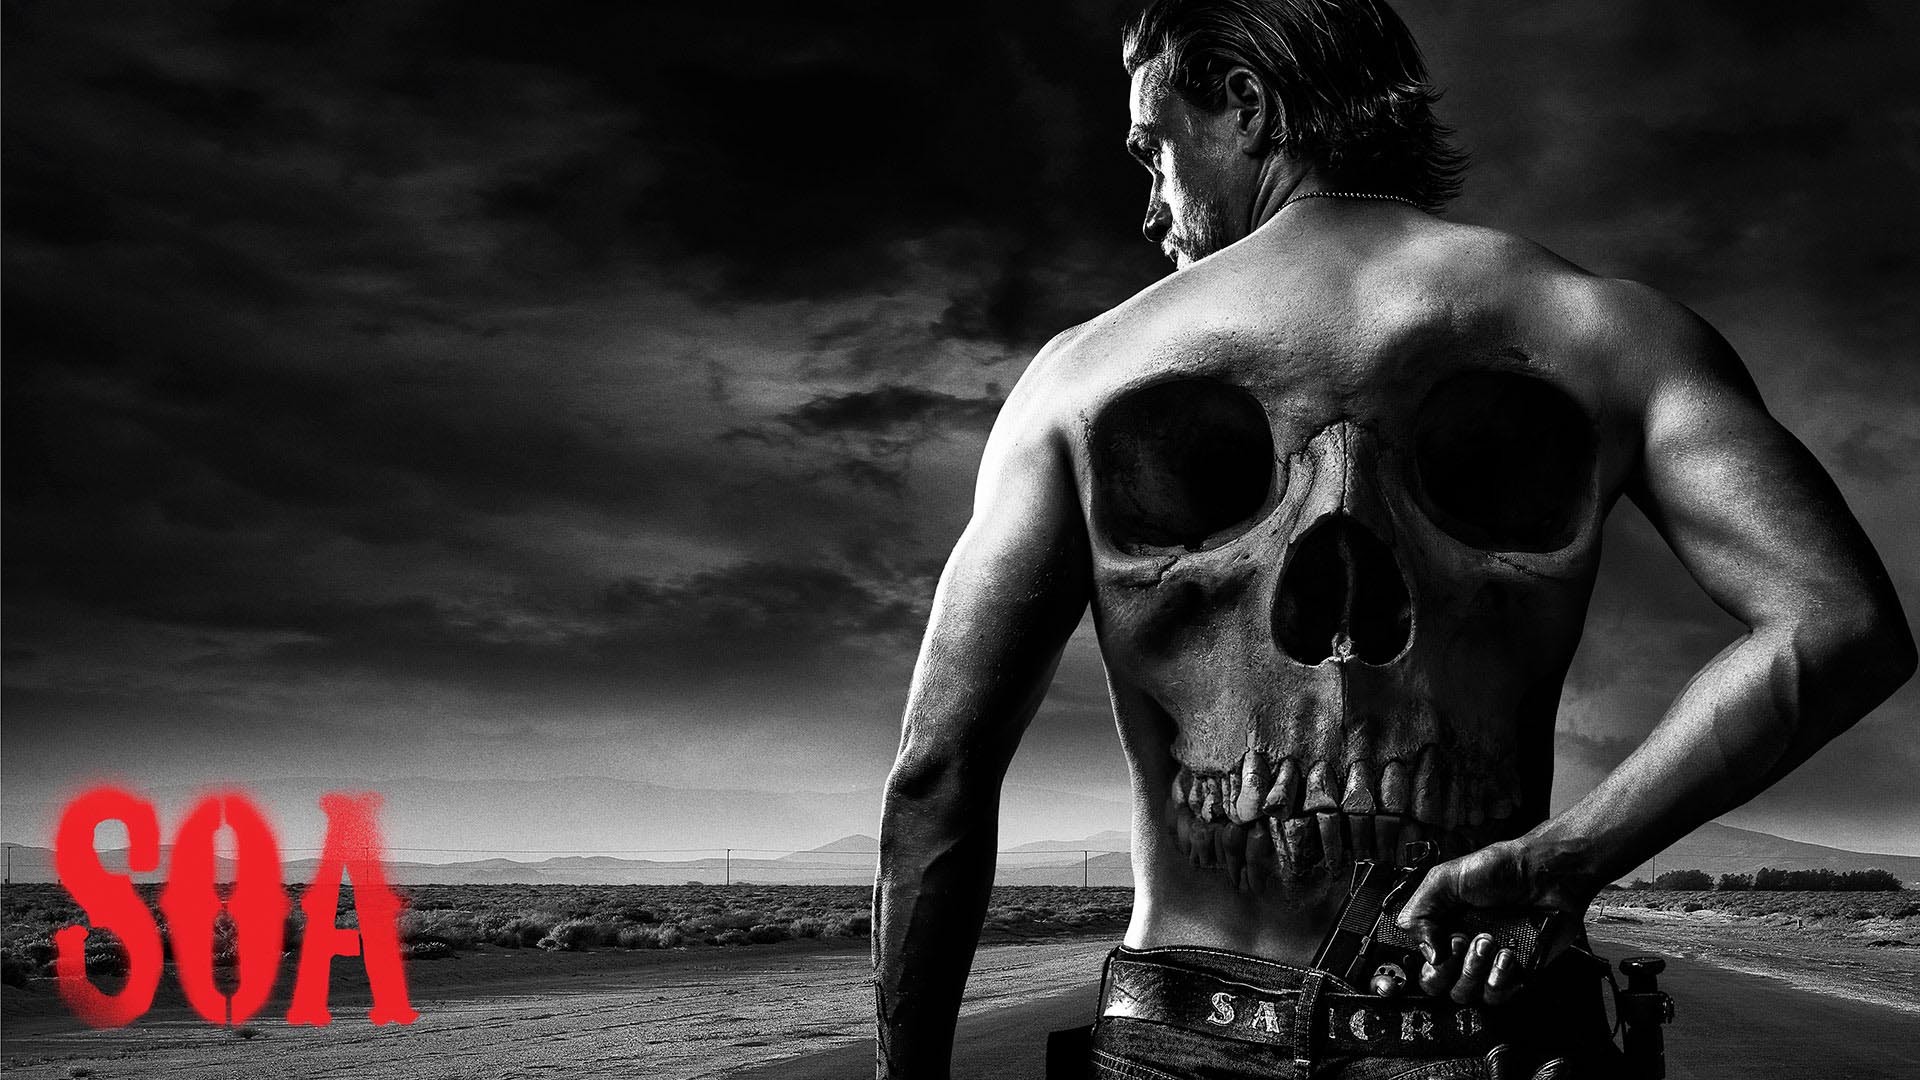 1920x1080 Image for Sons Of Anarchy Wallpaper Hd 1920Ã1080 14ckm